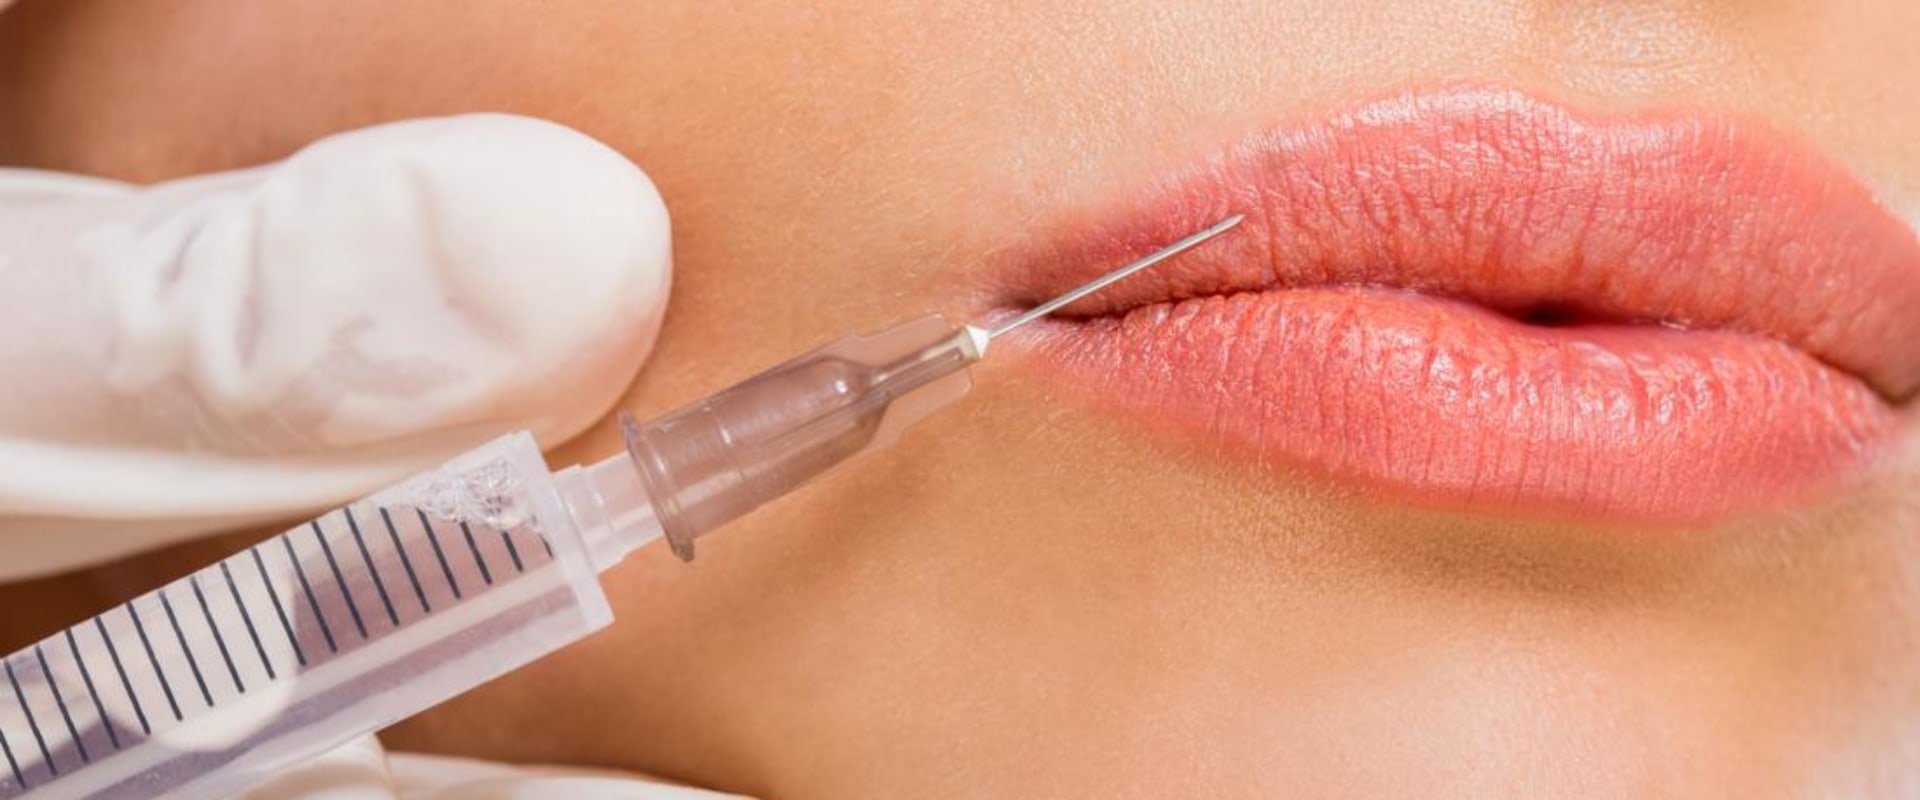 Whats Injectable Filler